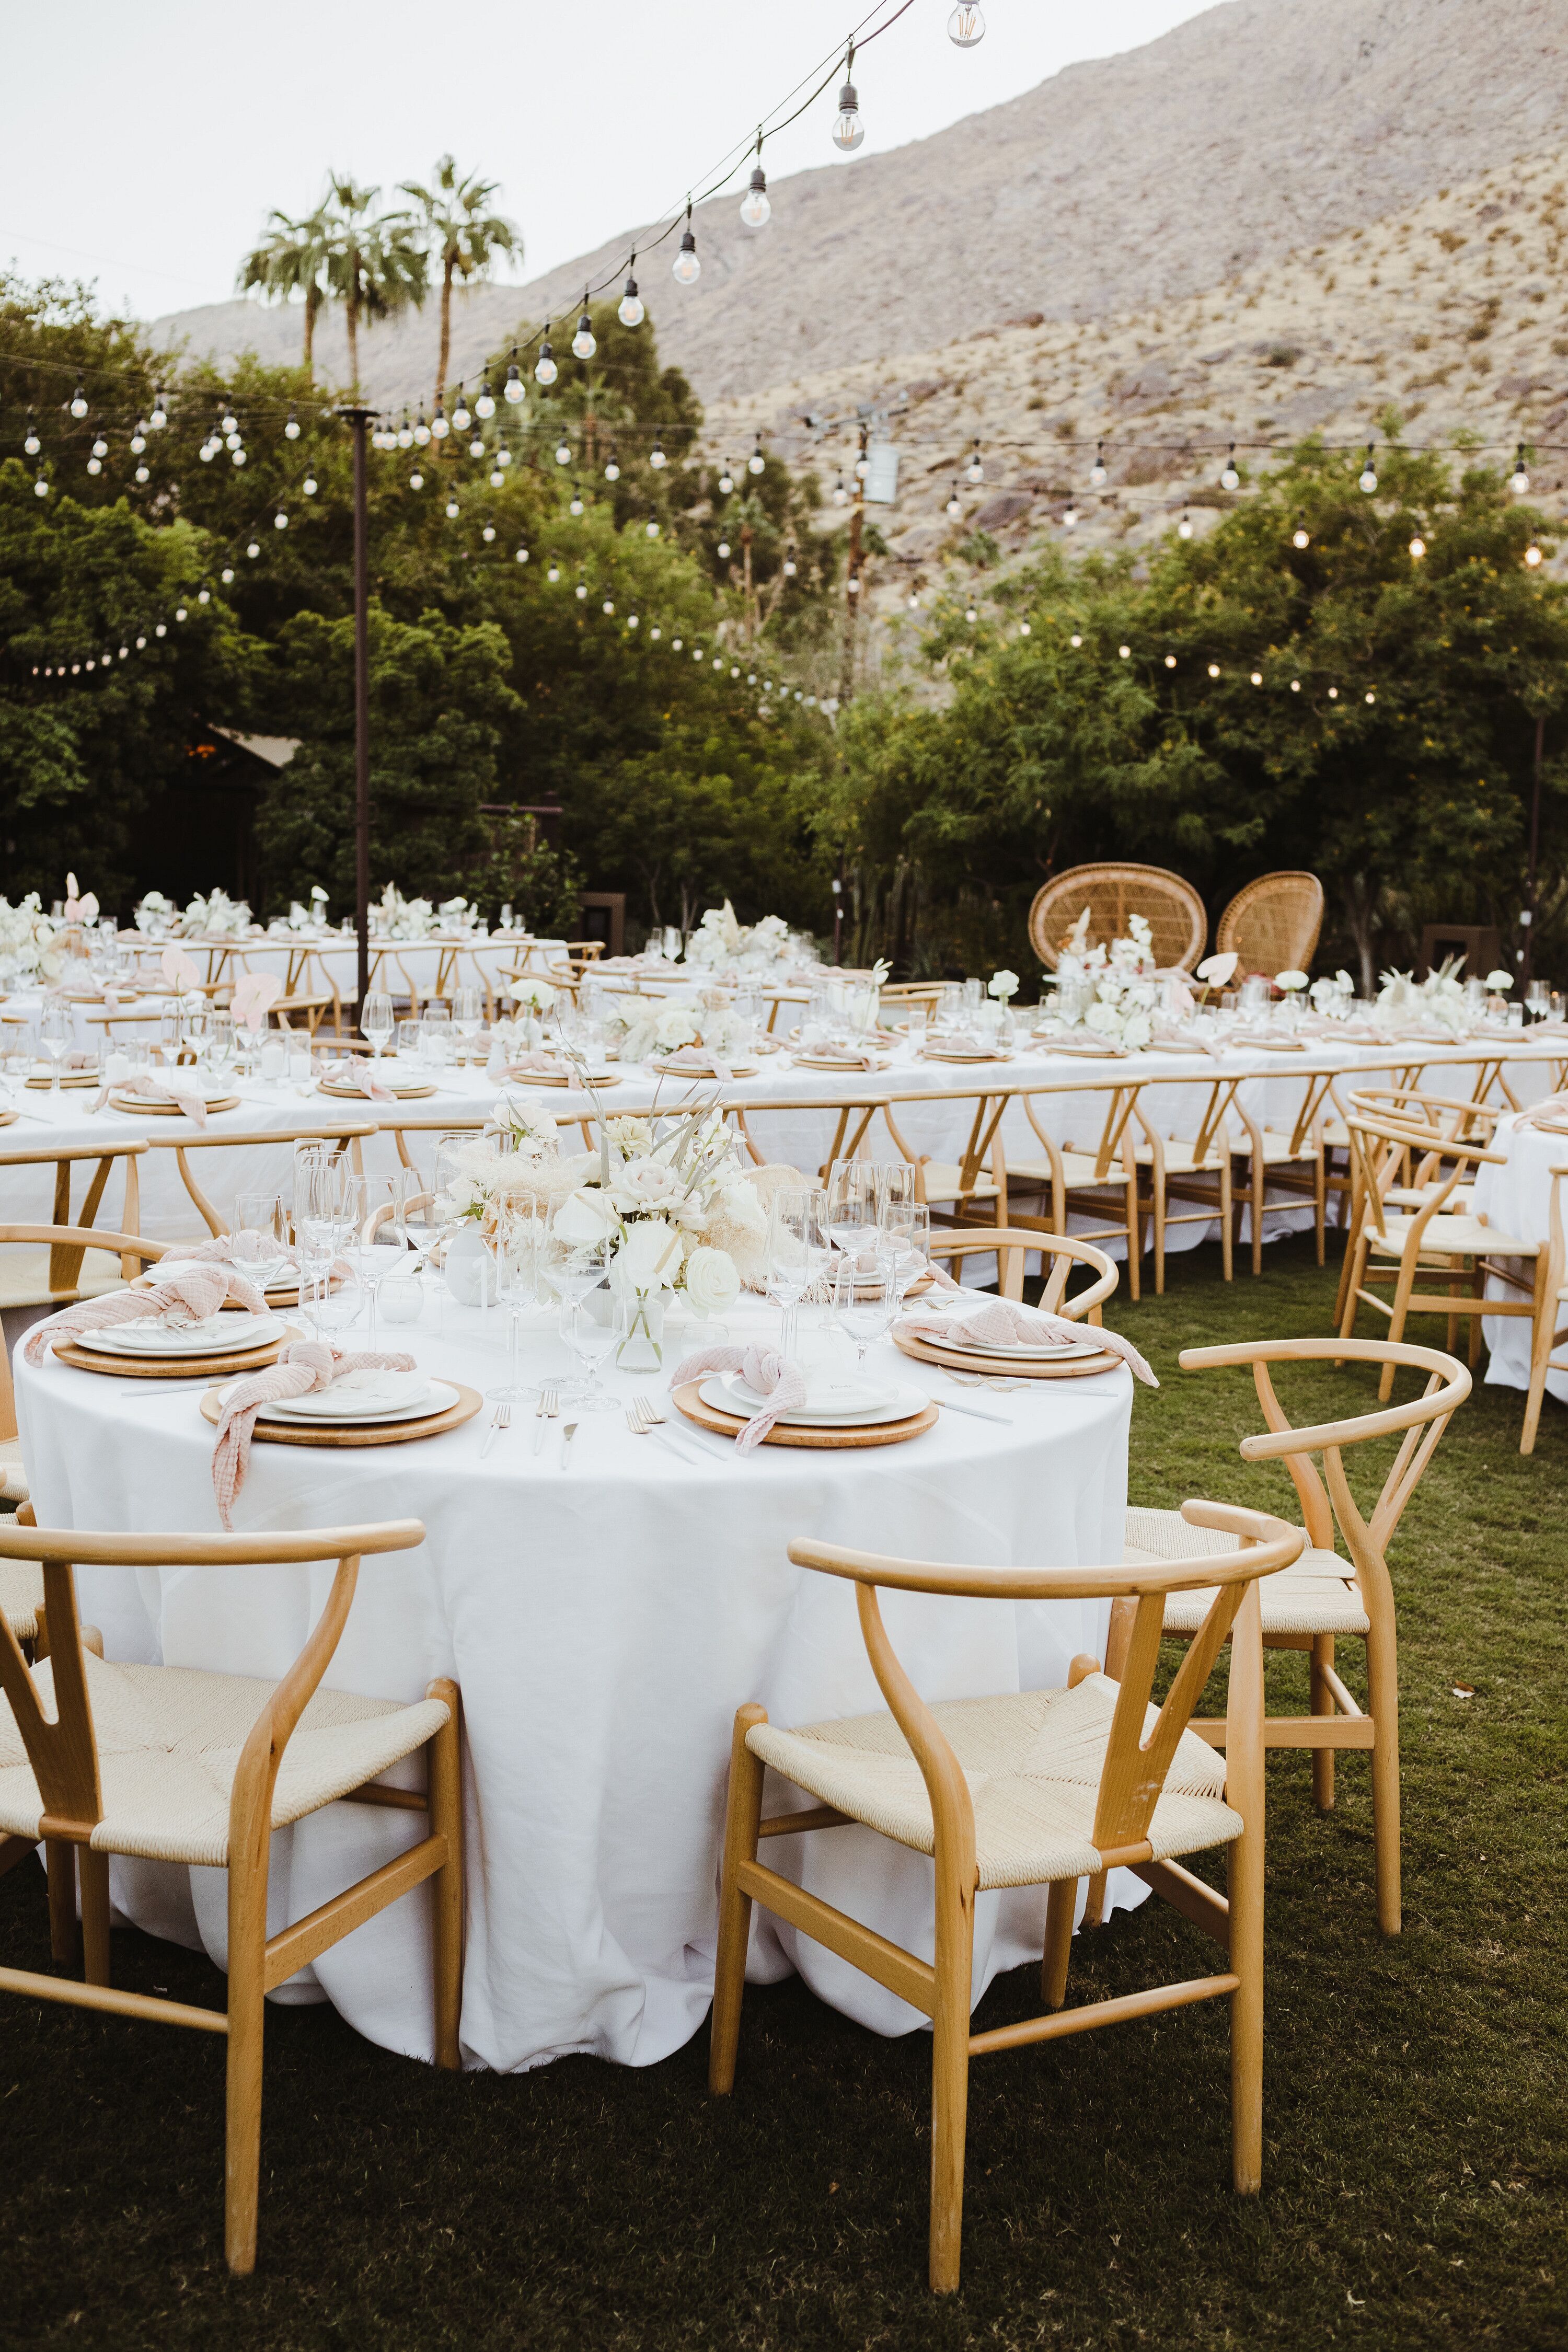 The Coast of Australia Inspired This Modern Neutral Wedding at Colony ...